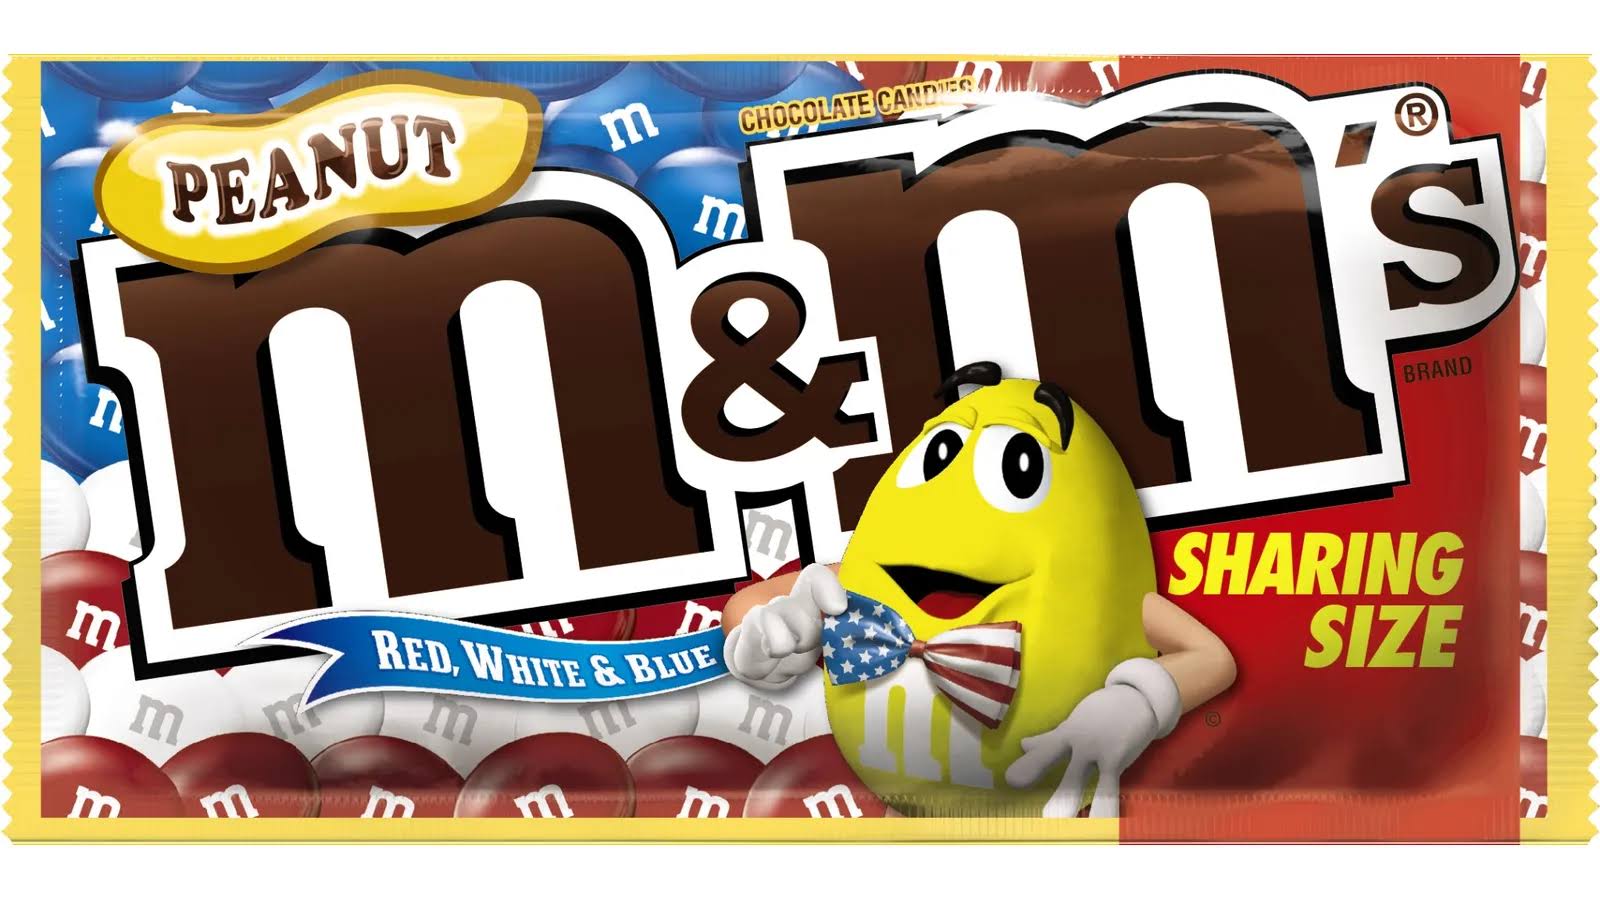 M&M's Chocolate Candies, Peanut, Red, White & Blue Mix, Share Size - 3.27 oz